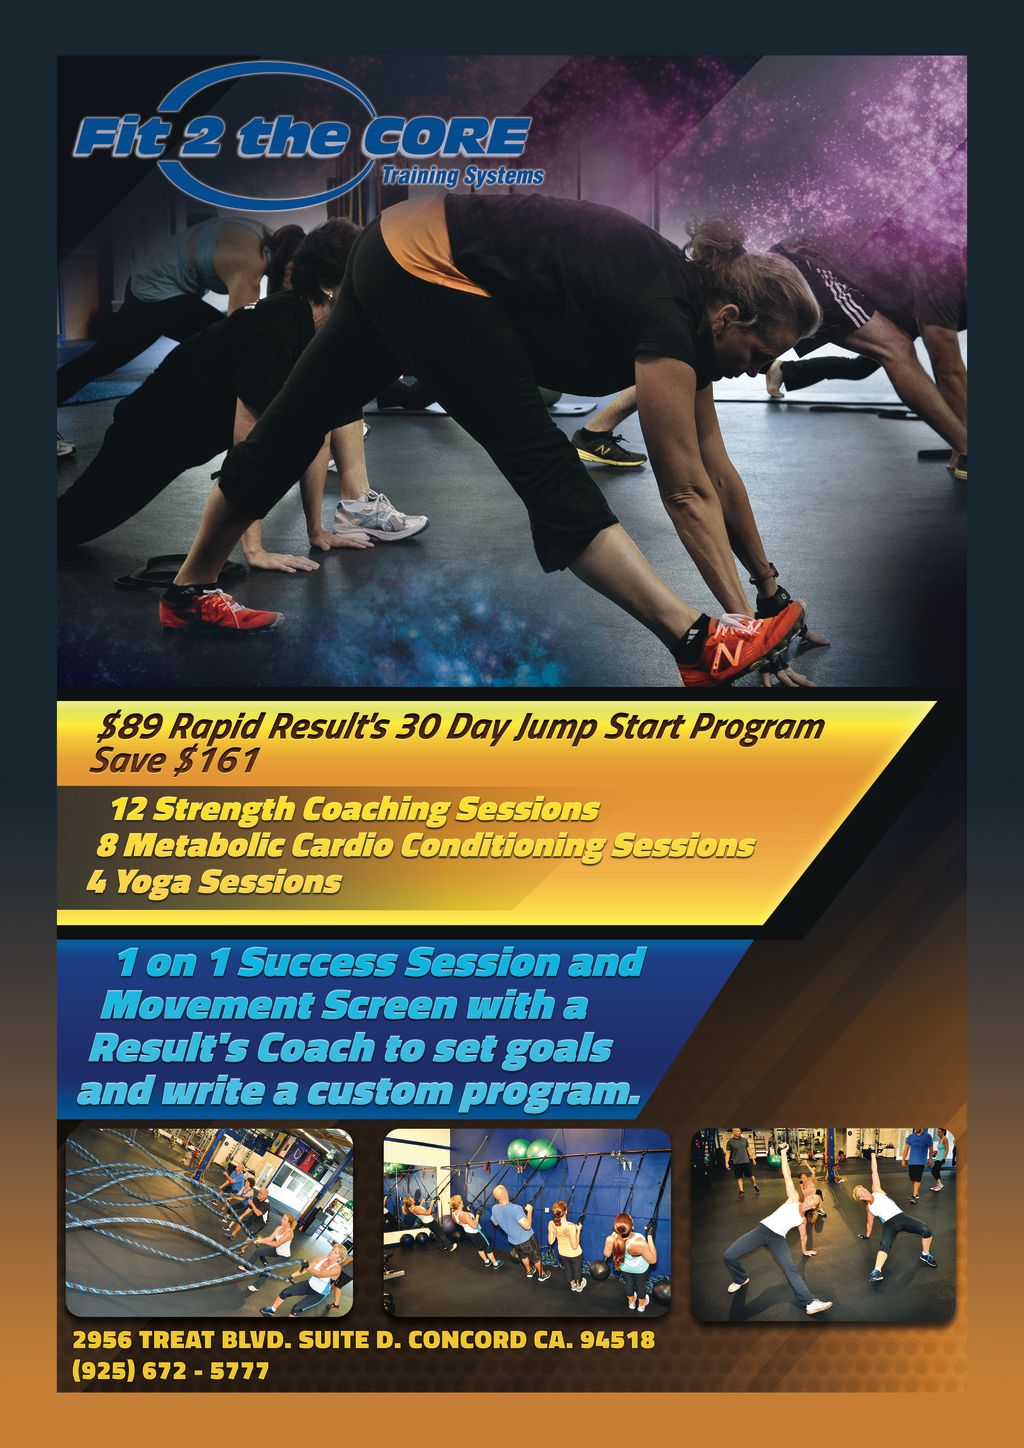 Fit-2-The-Core Training Systems